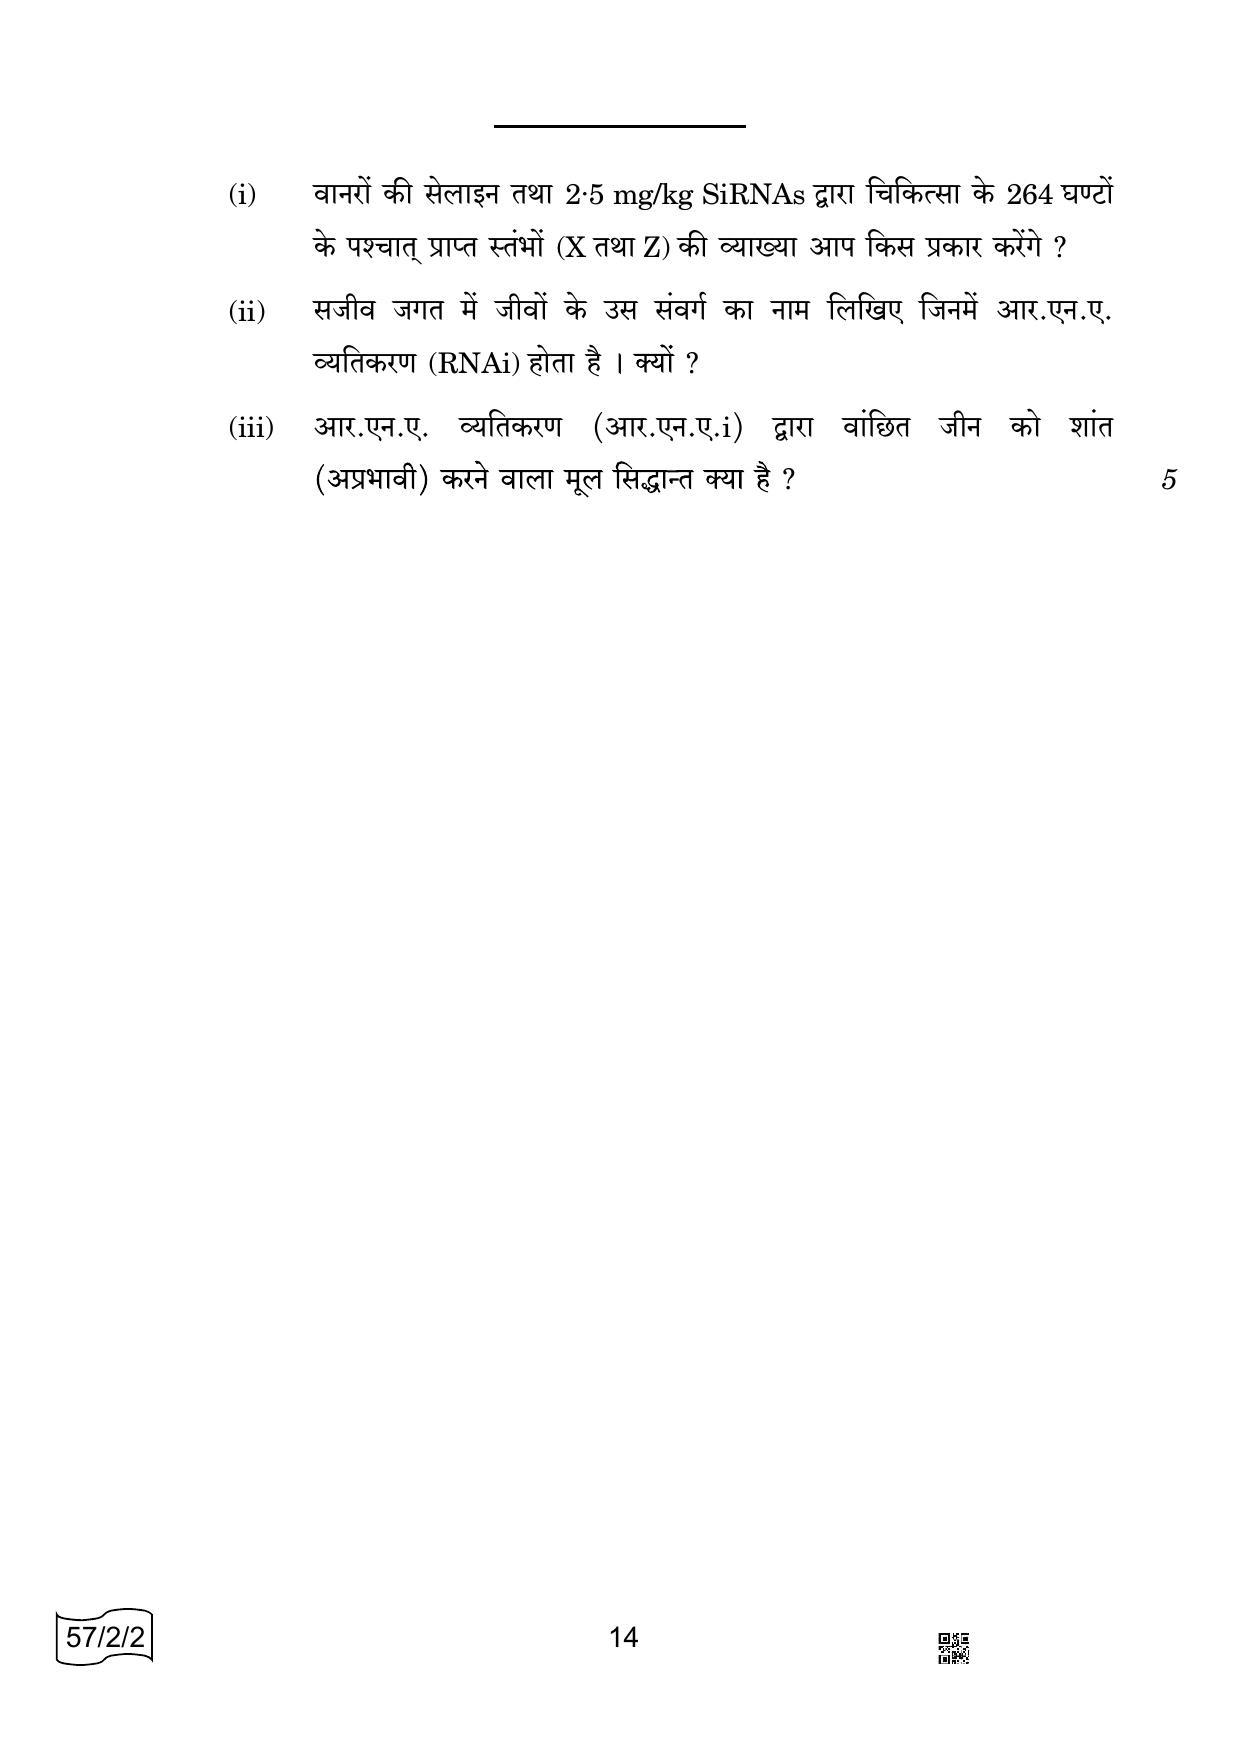 CBSE Class 12 57-2-2 Biology 2022 Question Paper - Page 14